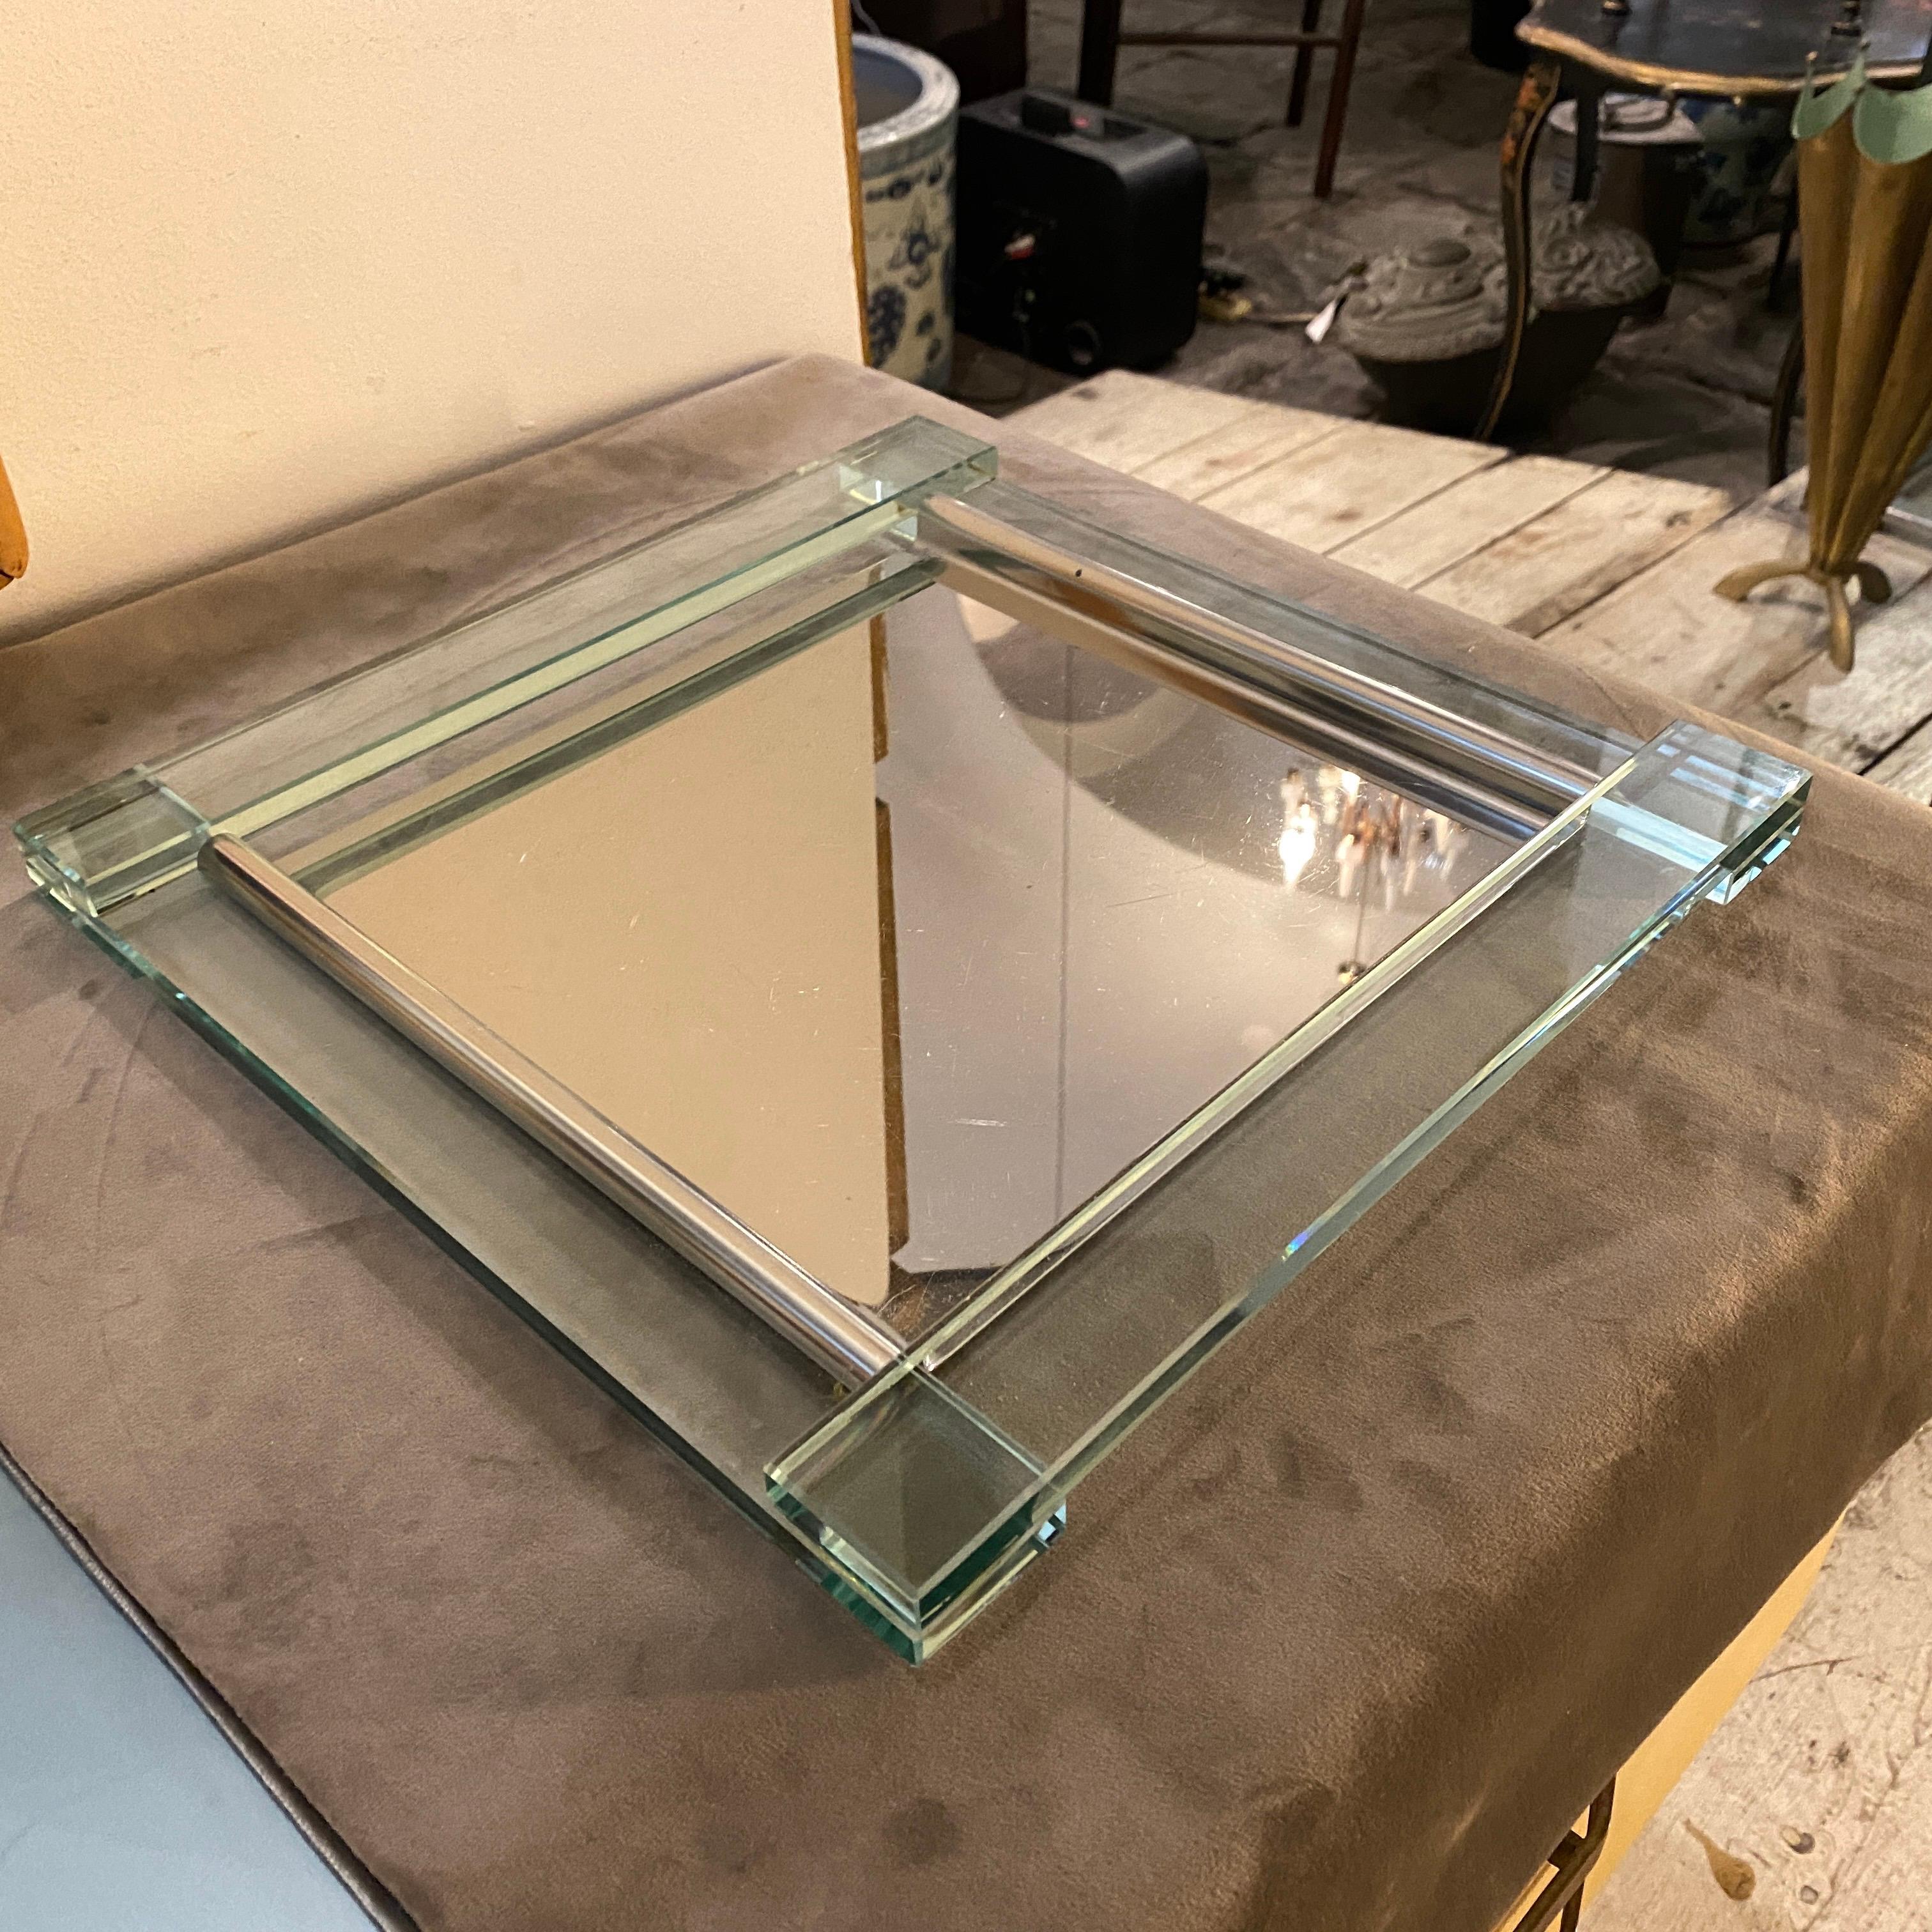 An Italian Design square tray, it's marked on a side, silver plated and heavy verde Nilo glass are in perfect conditions, the silver plated detachable part facilitates cleaning the item. This tray is a unique and elegant piece of serveware that is